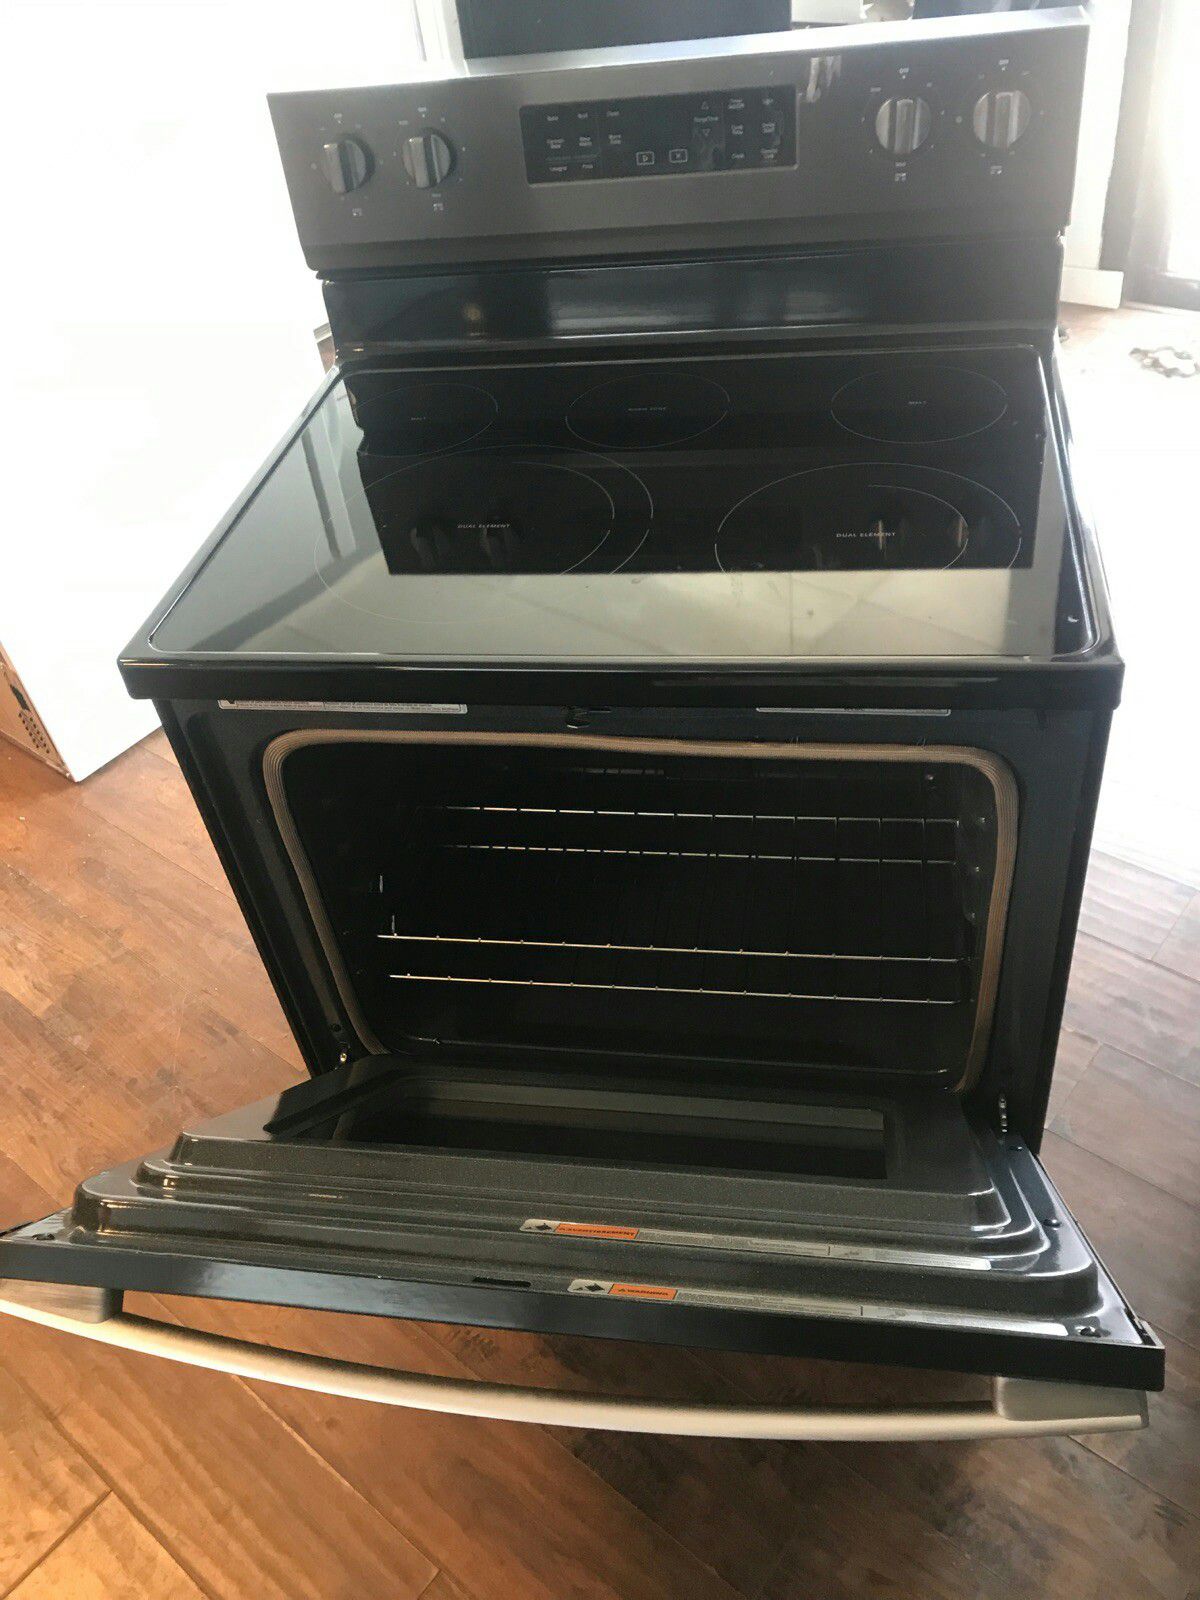 New blk stainless steel electric stove